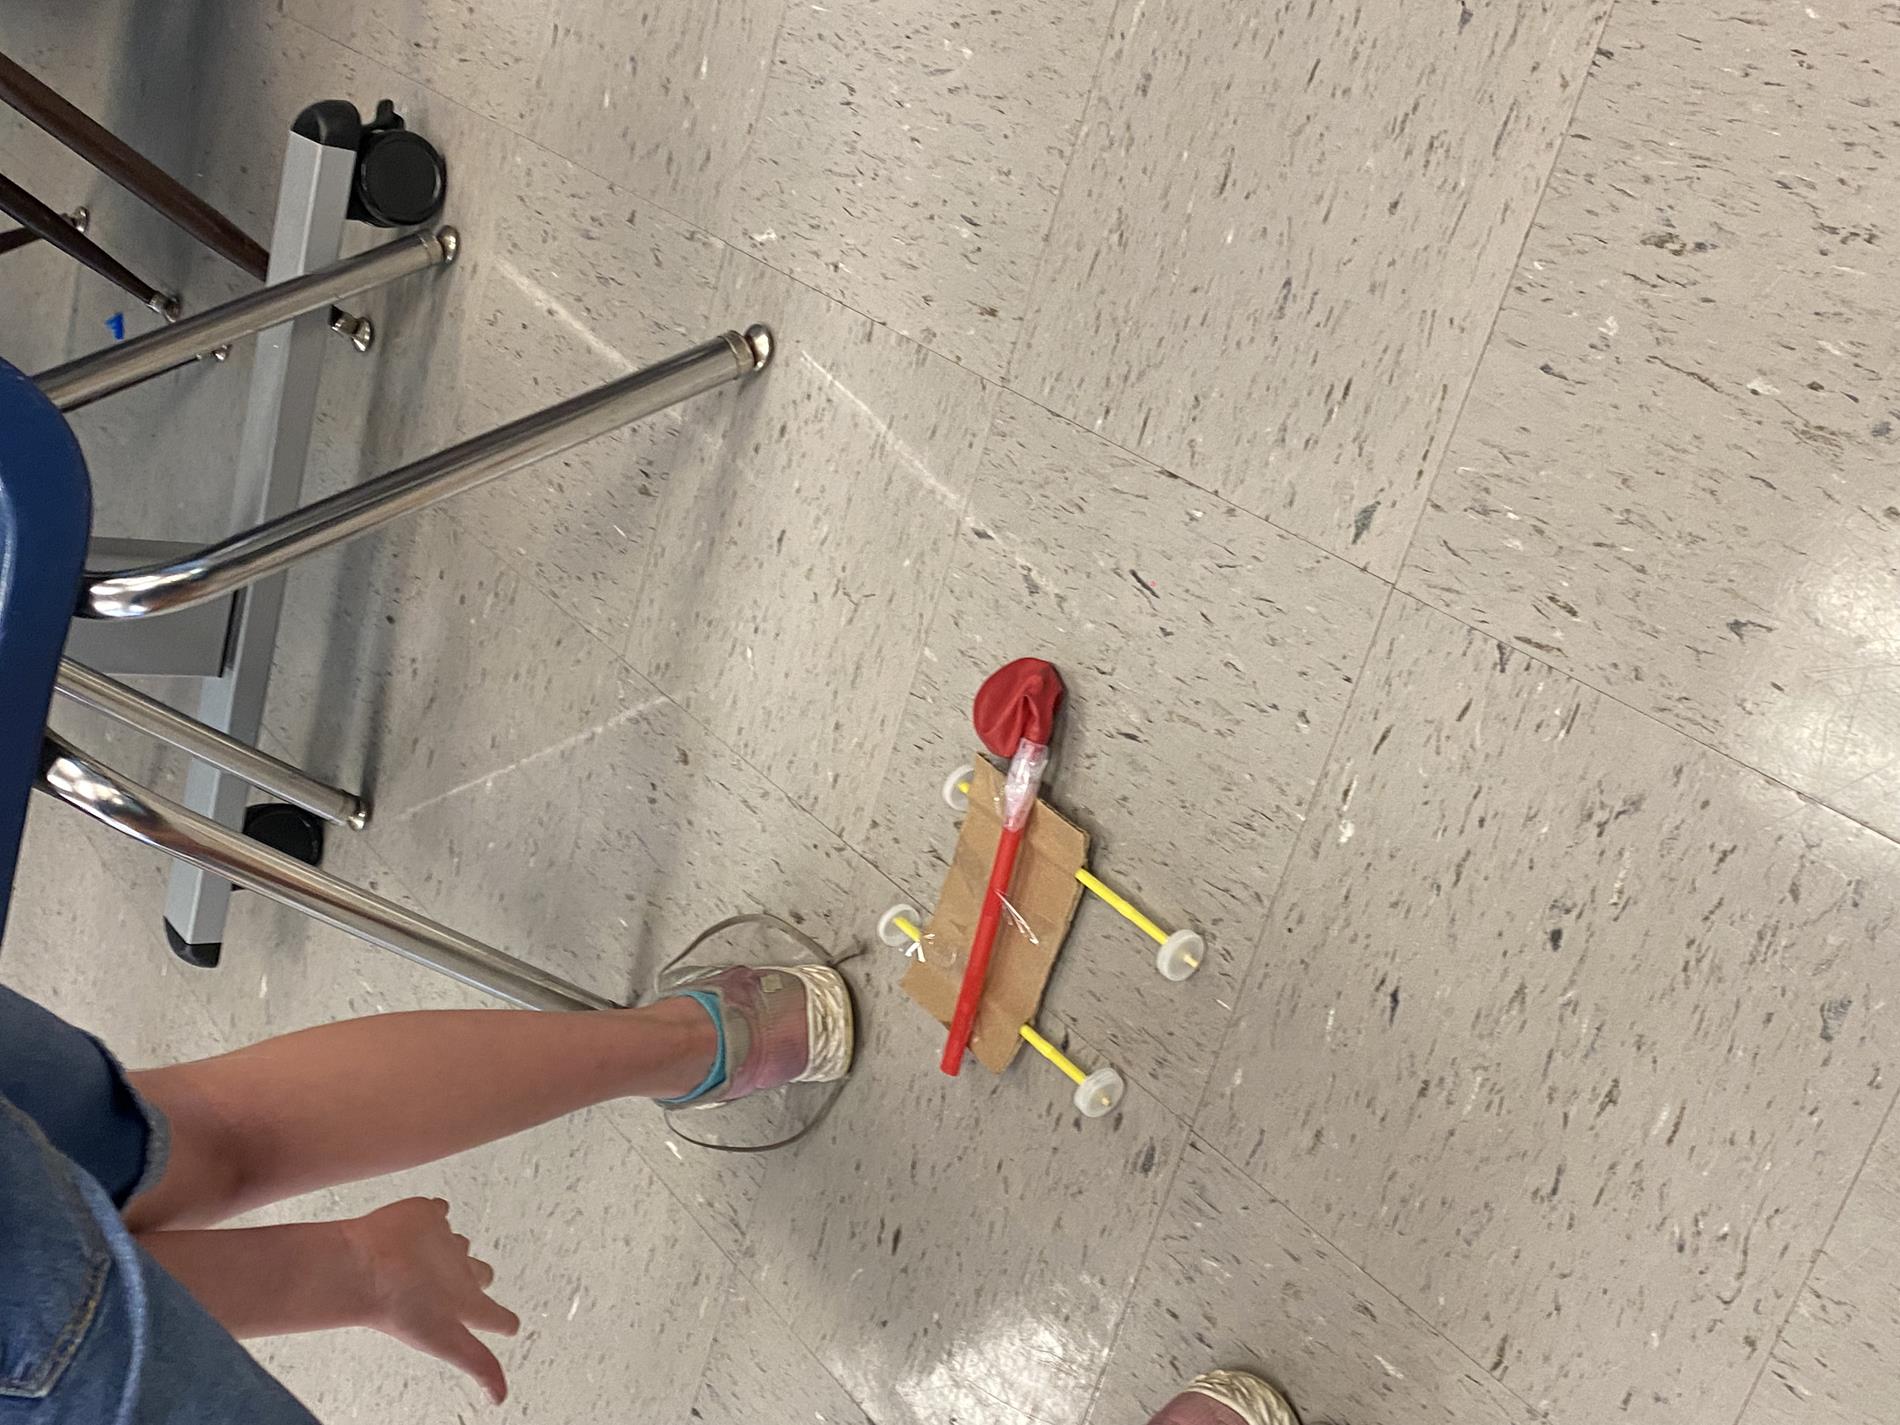 Students trying out their air powered cars.